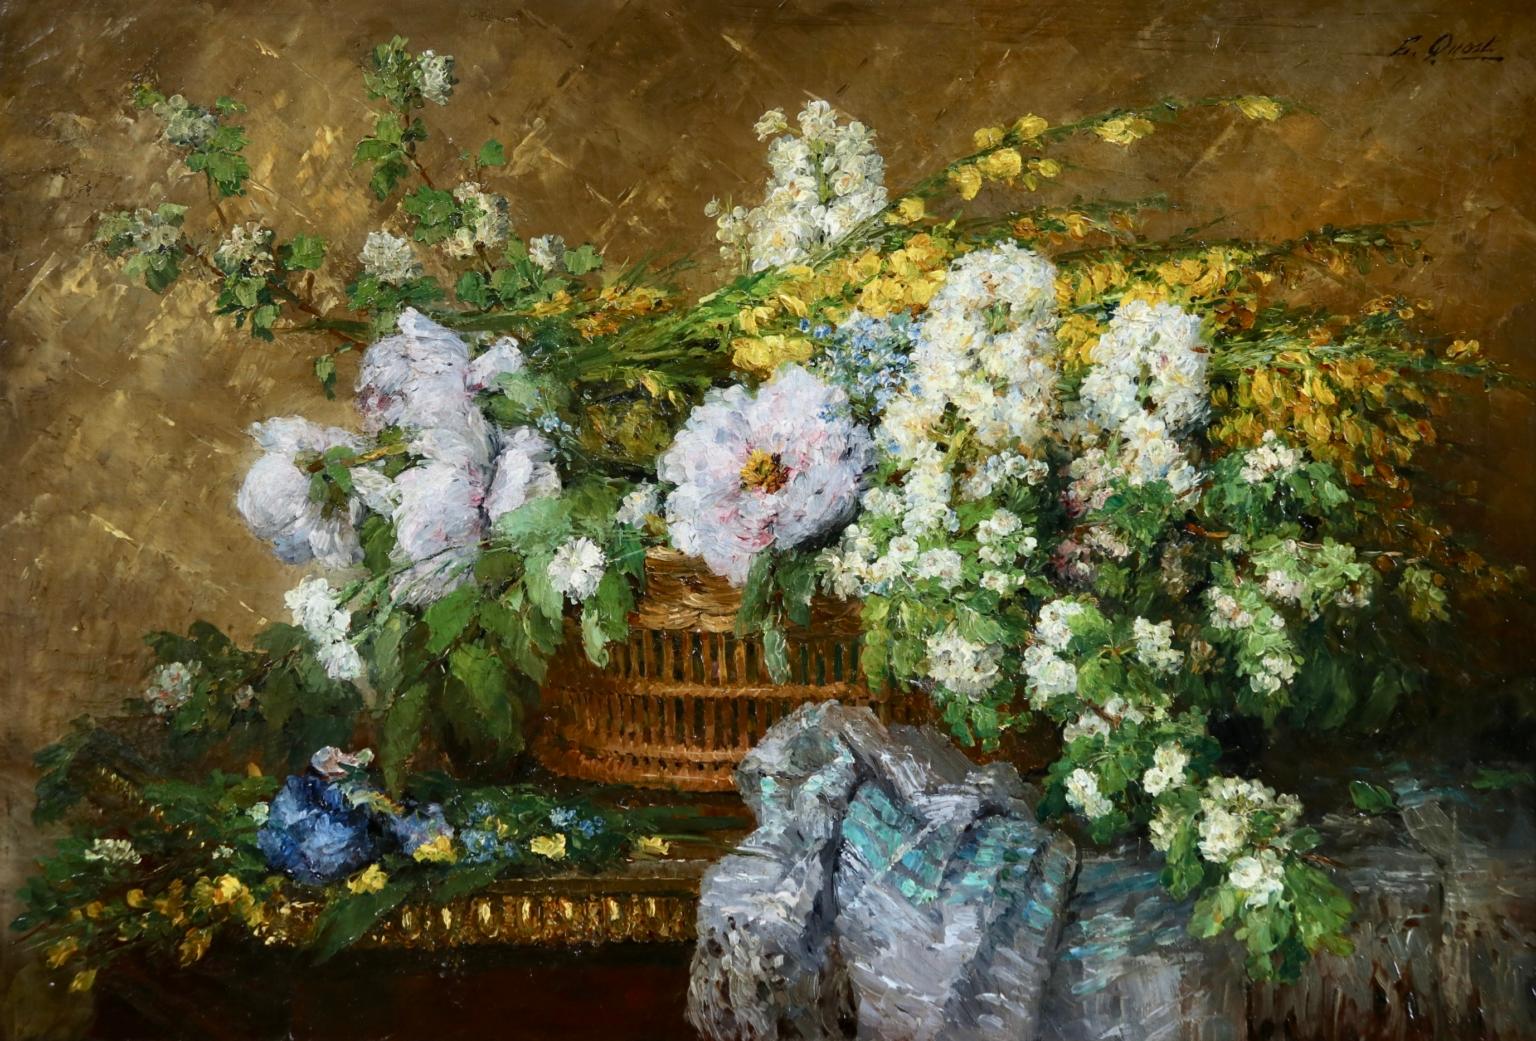 Oil on original canvas by French painter Ernest Quost depicting a basket full of flowers placed on a table. Signed upper right. Framed dimensions are 37 inches high by 50 inches wide. This is an unusually large work by Quost who was much admired by